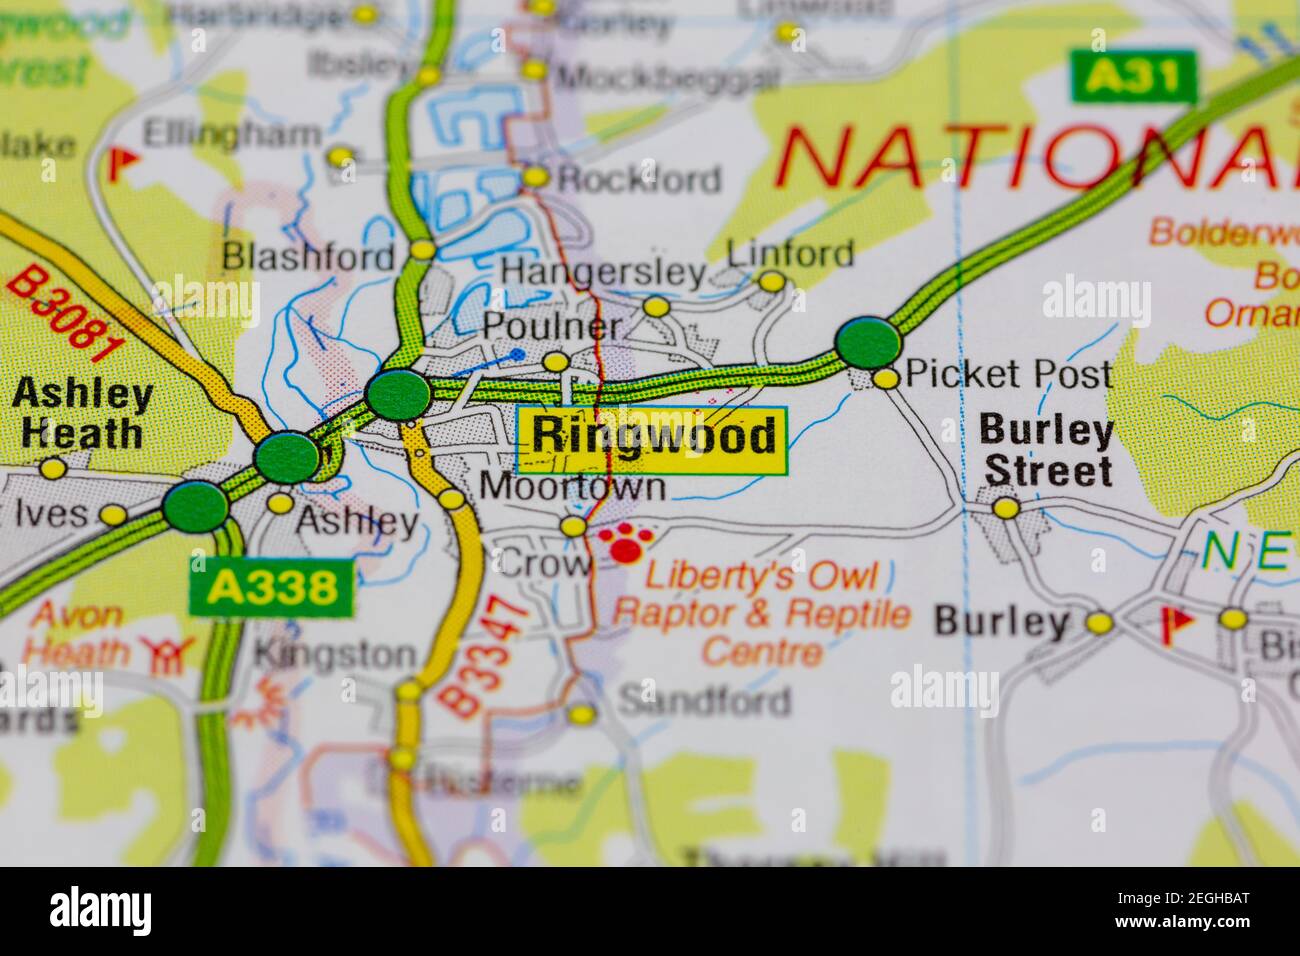 Ringwood and surrounding areas shown on a road map or geography map Stock Photo